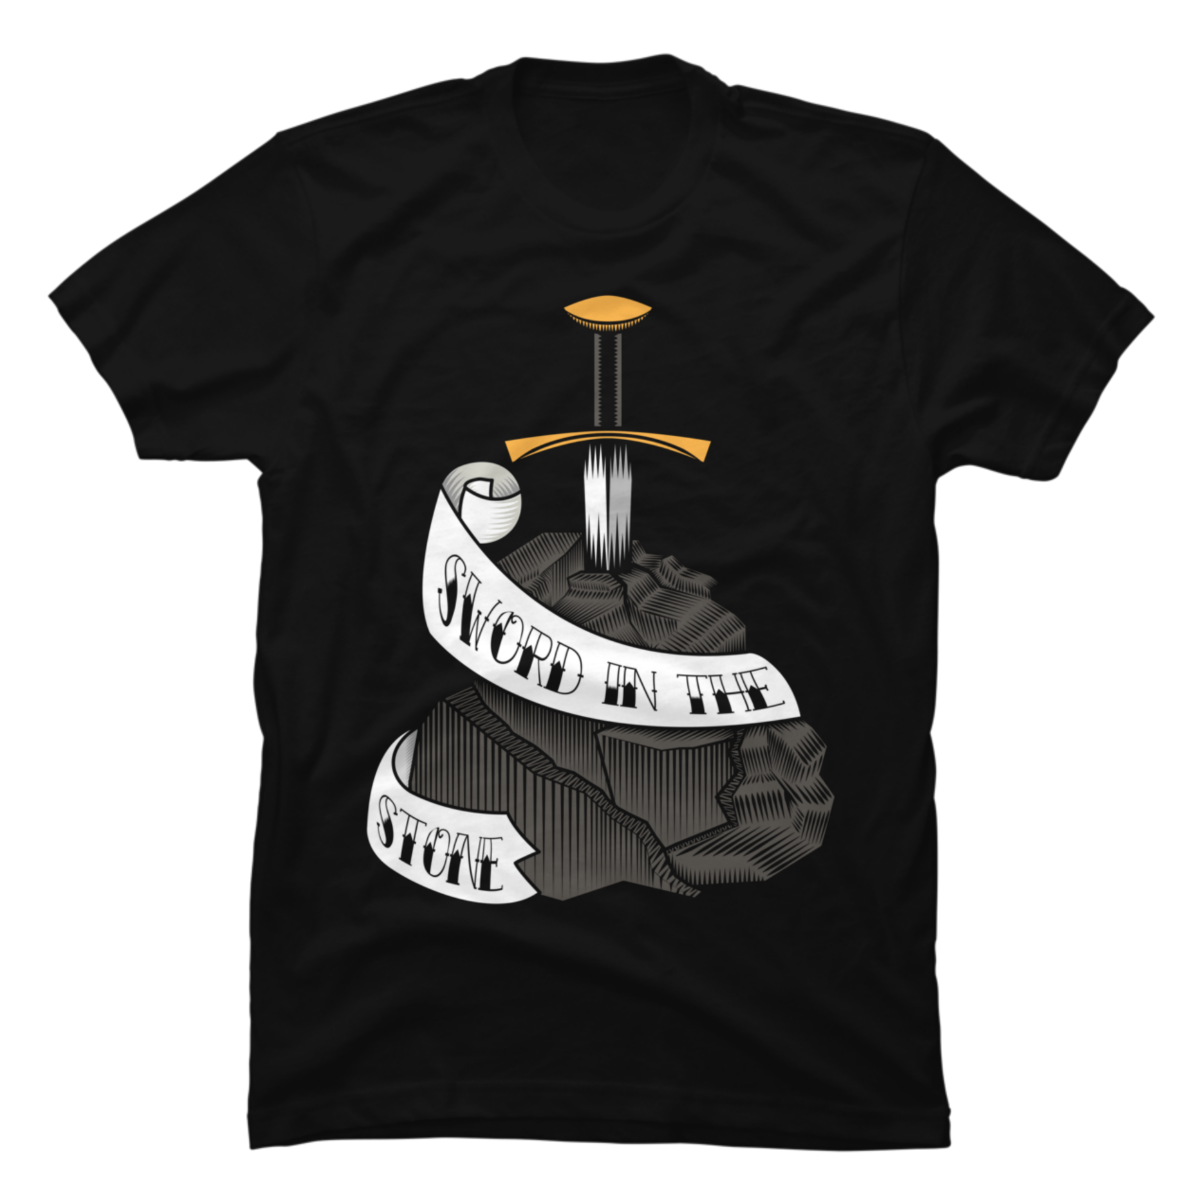 sword in the stone shirt